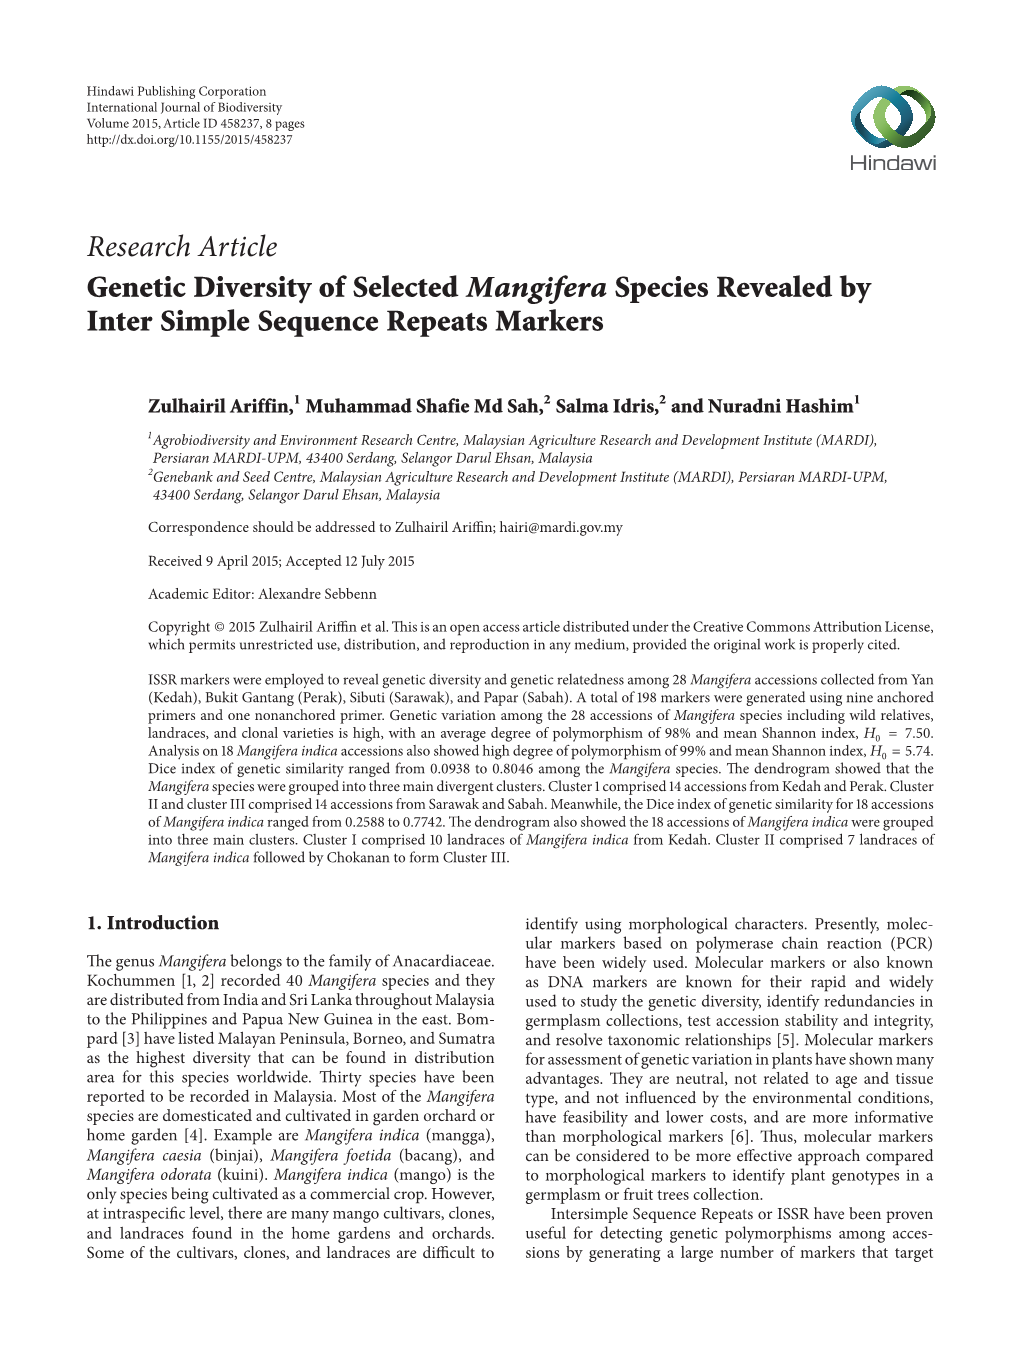 Genetic Diversity of Selected Mangifera Species Revealed by Inter Simple Sequence Repeats Markers